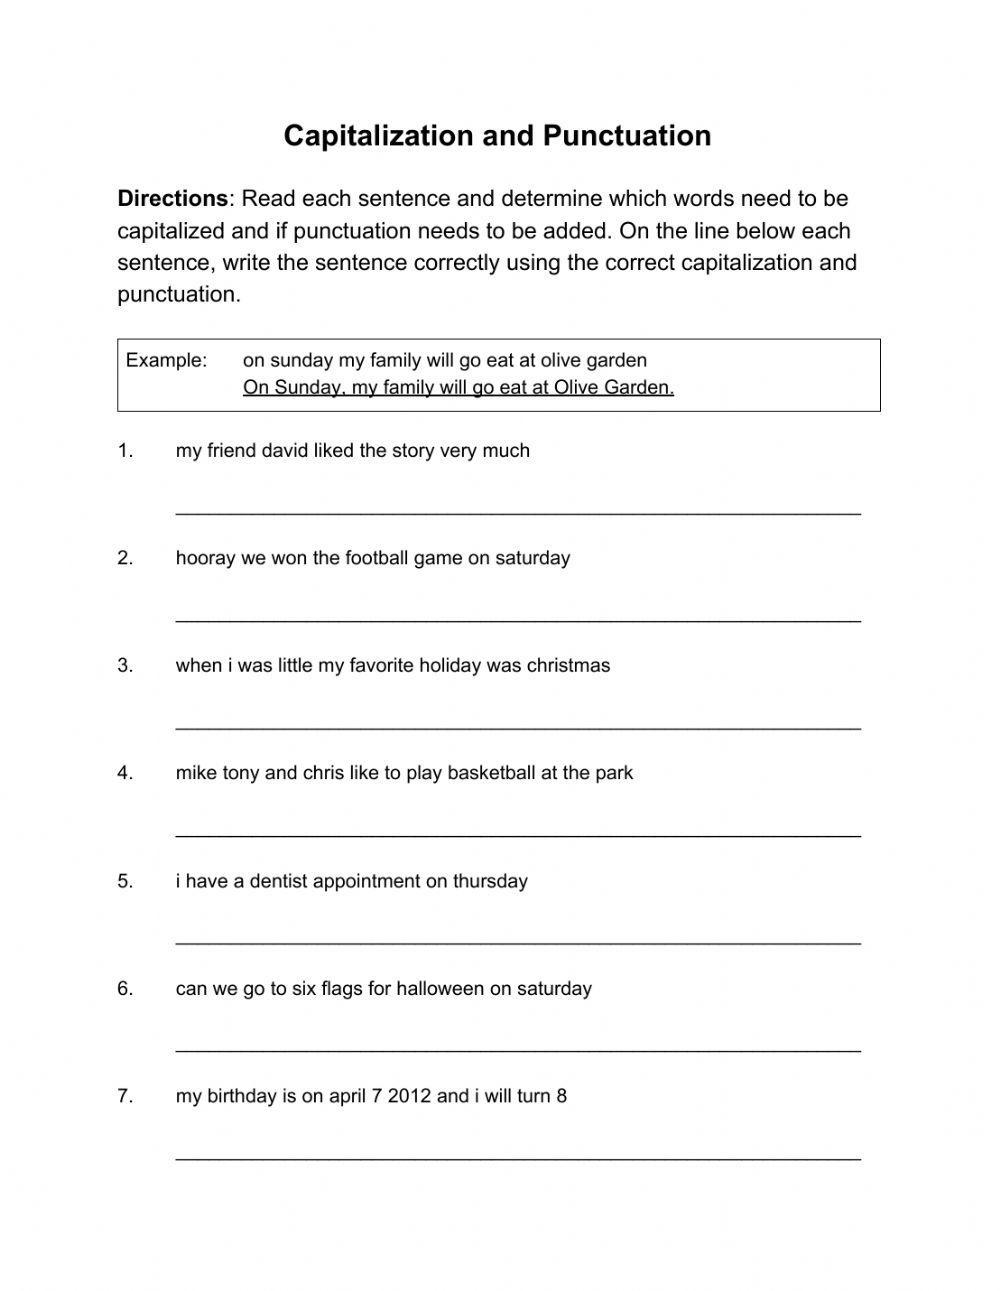 capitalization-and-punctuation-audio-worksheet-live-worksheets